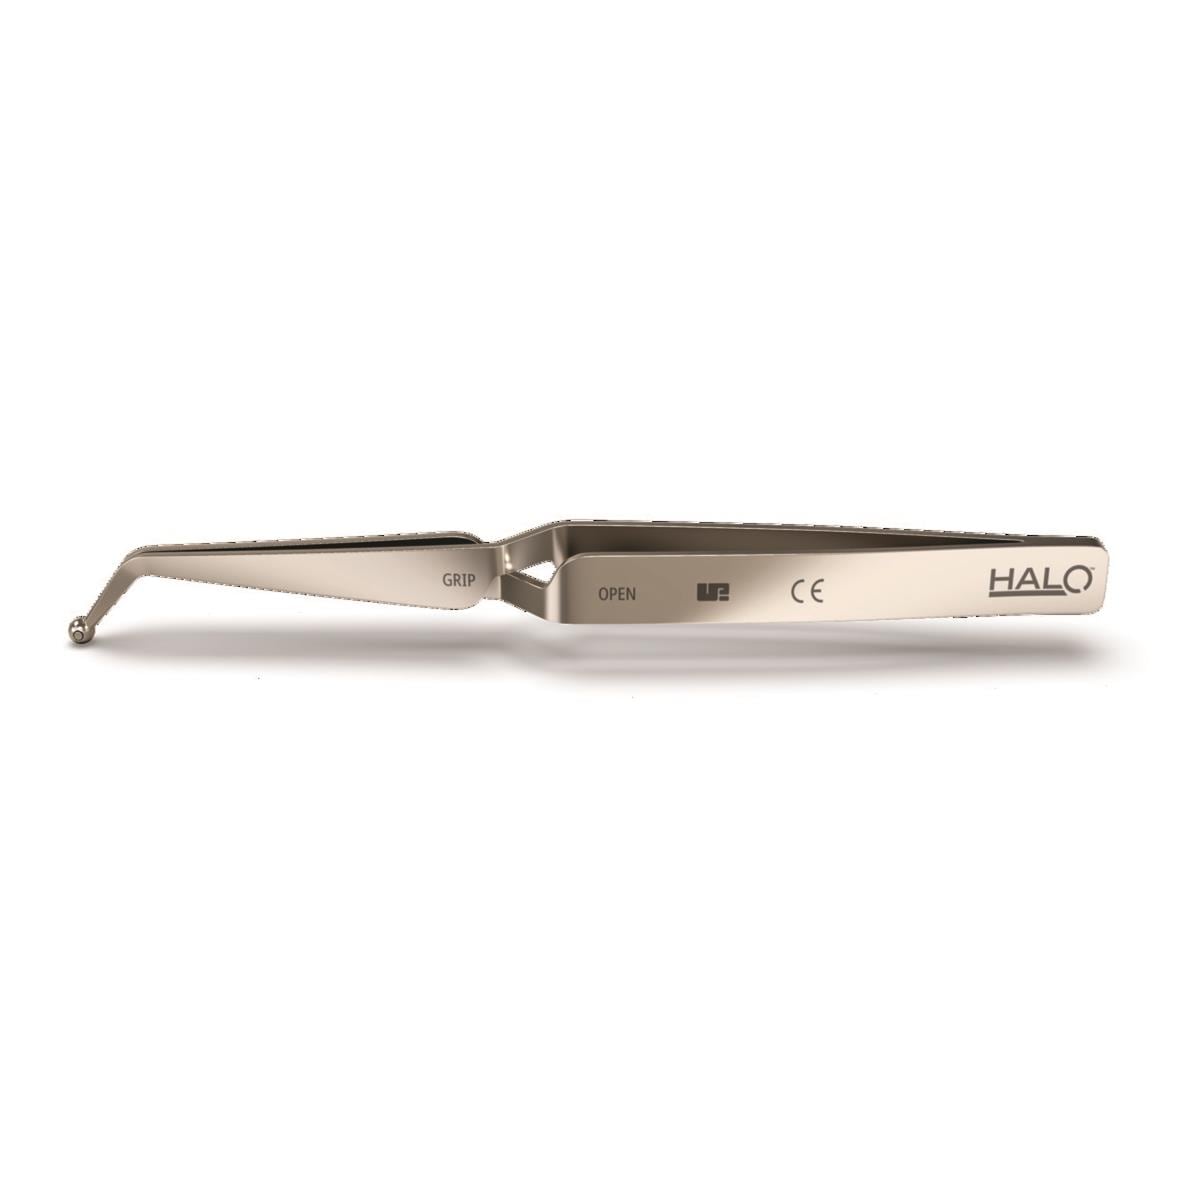 Prcelles (1) Halo Ultradent